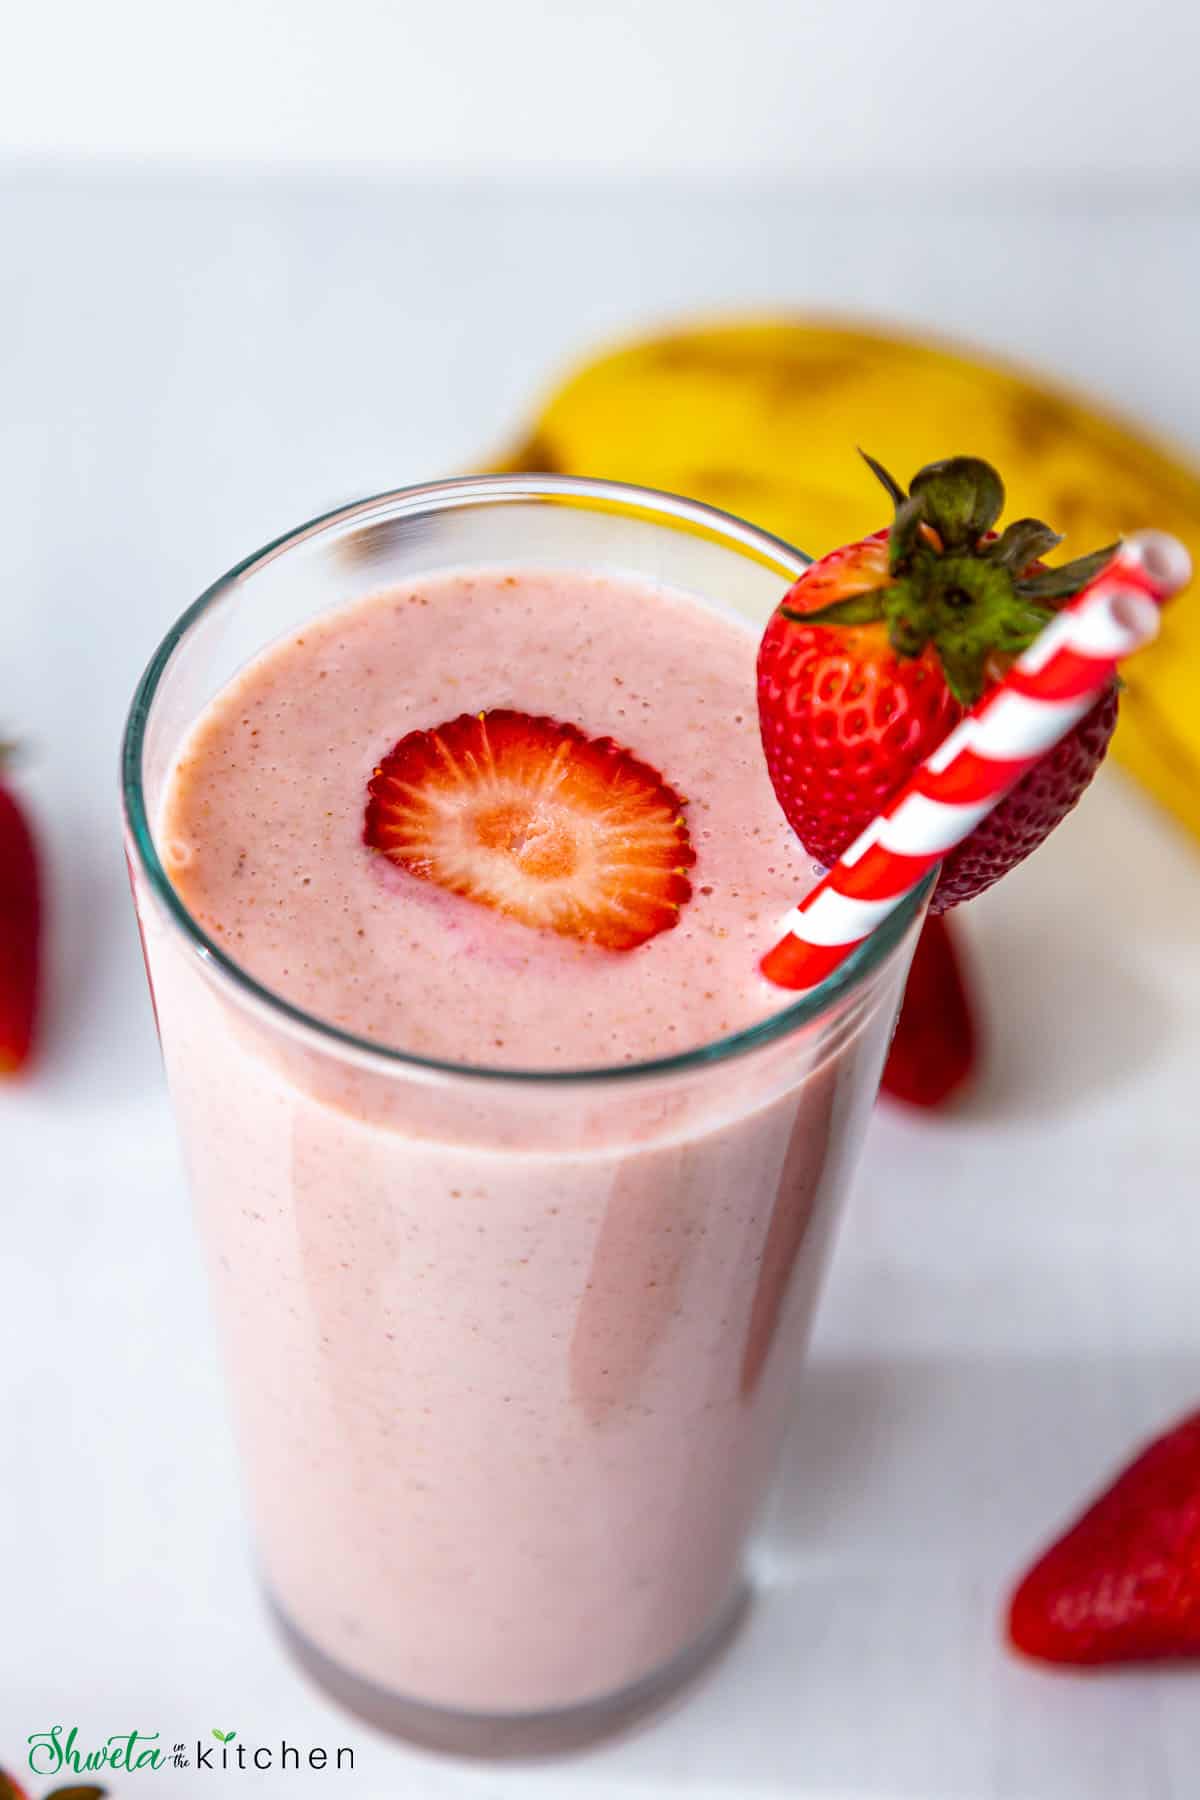 Strawberry banana smoothie in a tall glass with red stripped straw and strawberry on the side and centre